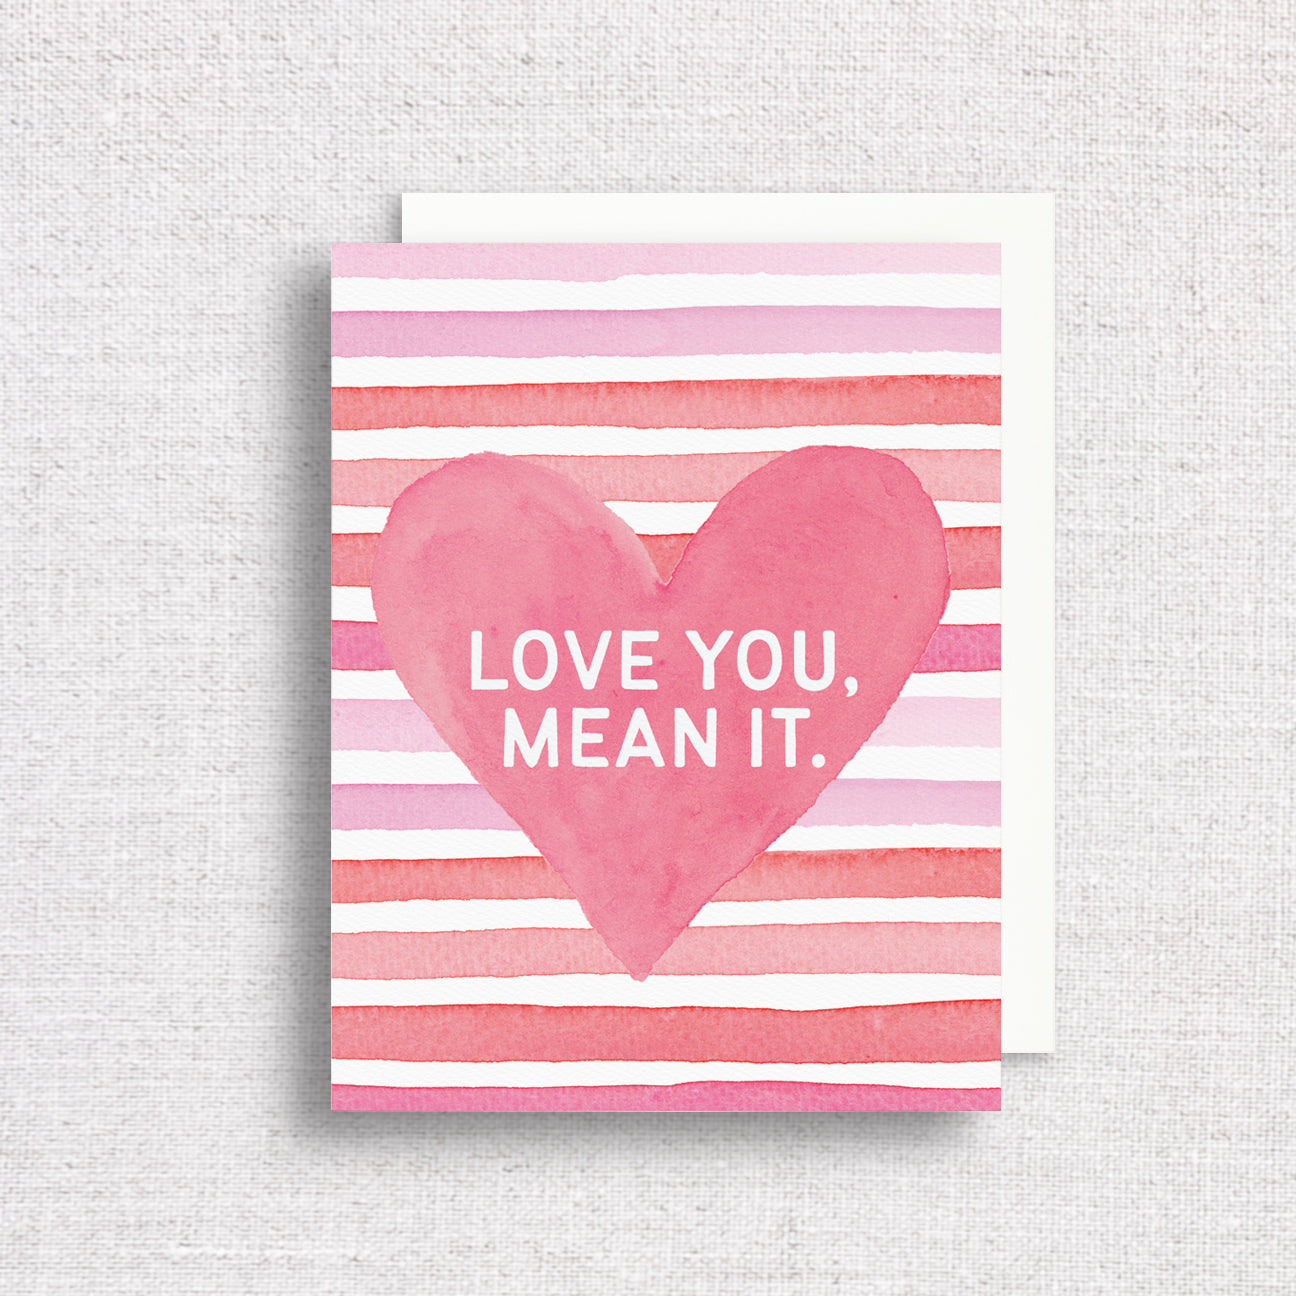 "Love You, Mean It" Greeting Card by Gert & Co